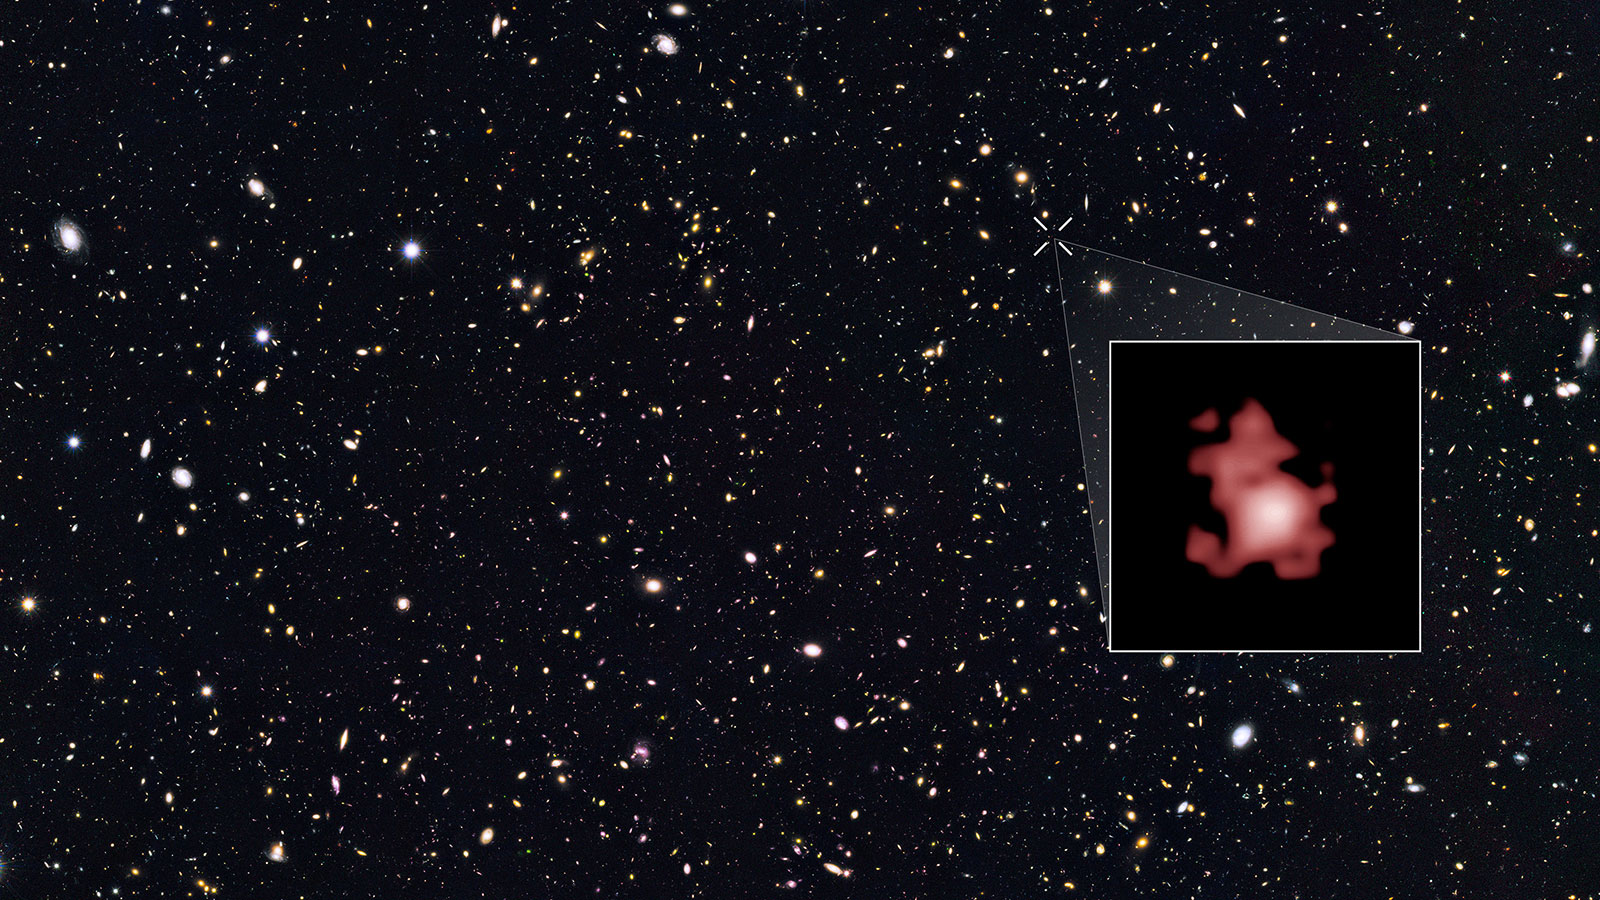 Spitzer and Hubble uncovered the most distant known galaxy, GN-z11